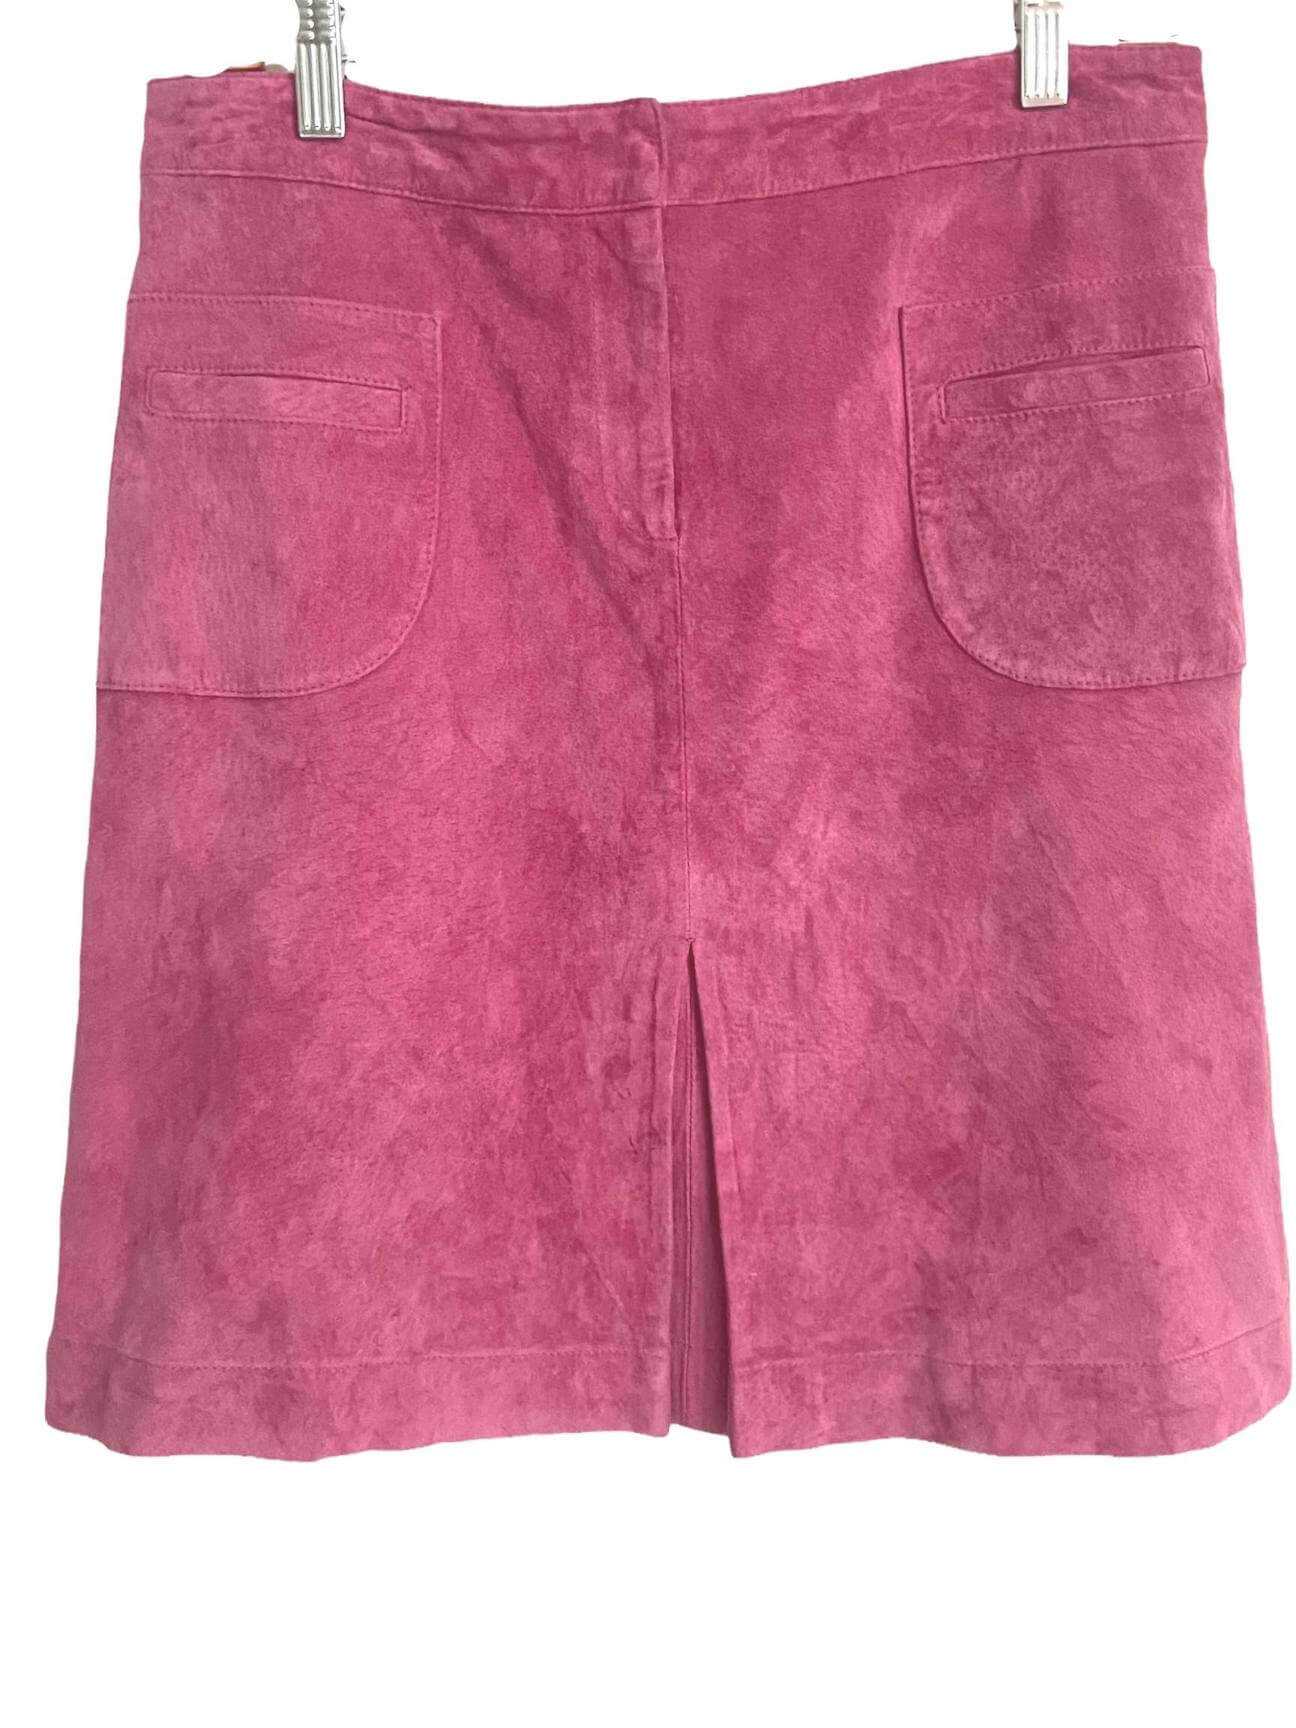 Cool Summer LILLY PULITZER pink suede skirt